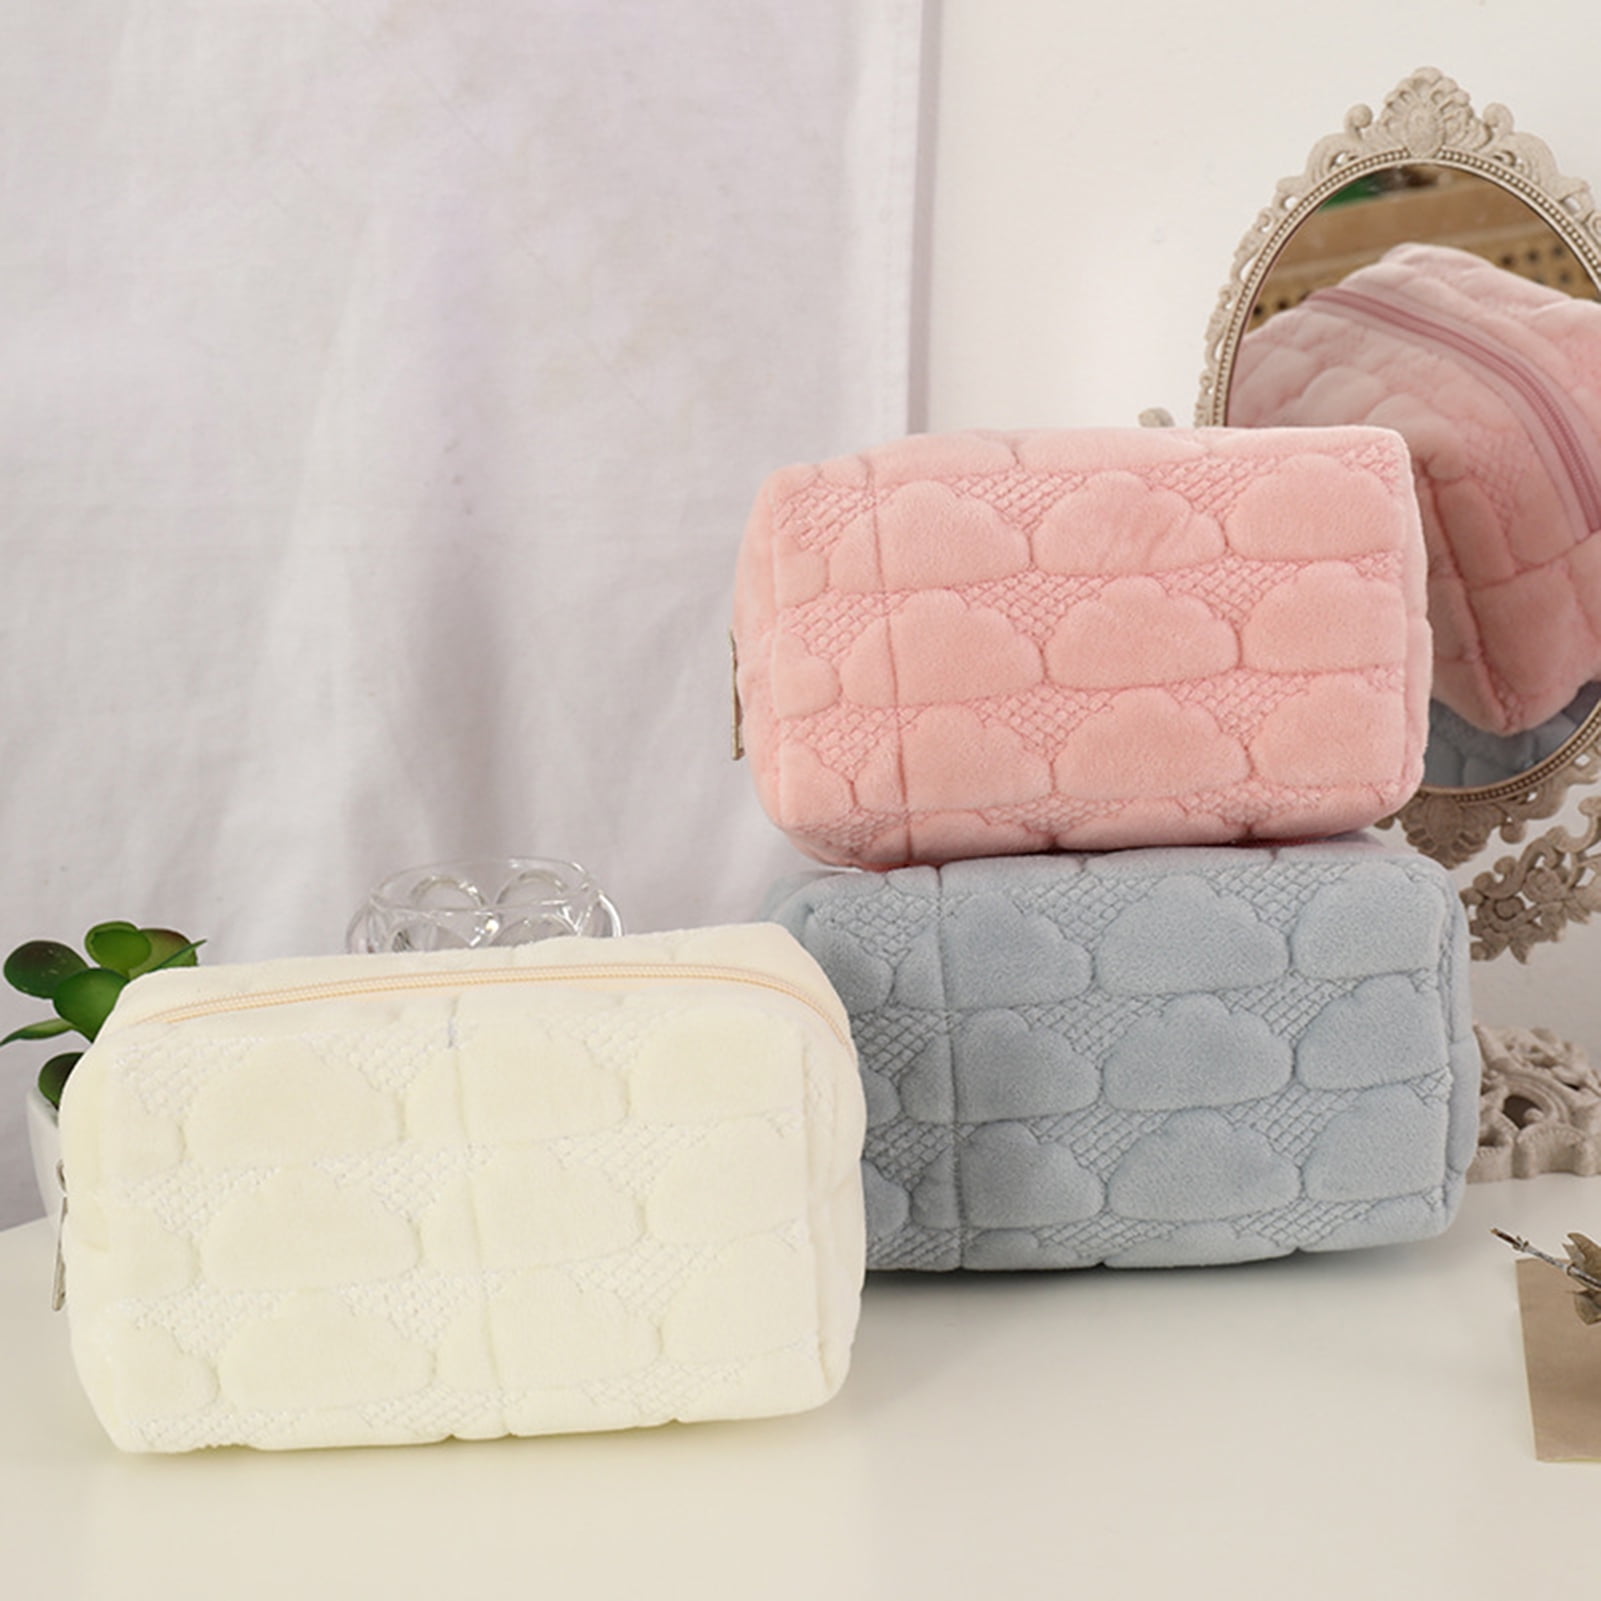 Makeup Bag High Capacity Comfortable Touch Dust-proof Portable Cloud Shape Soft  Plush Cosmetic Handbag for Daily Use,White 